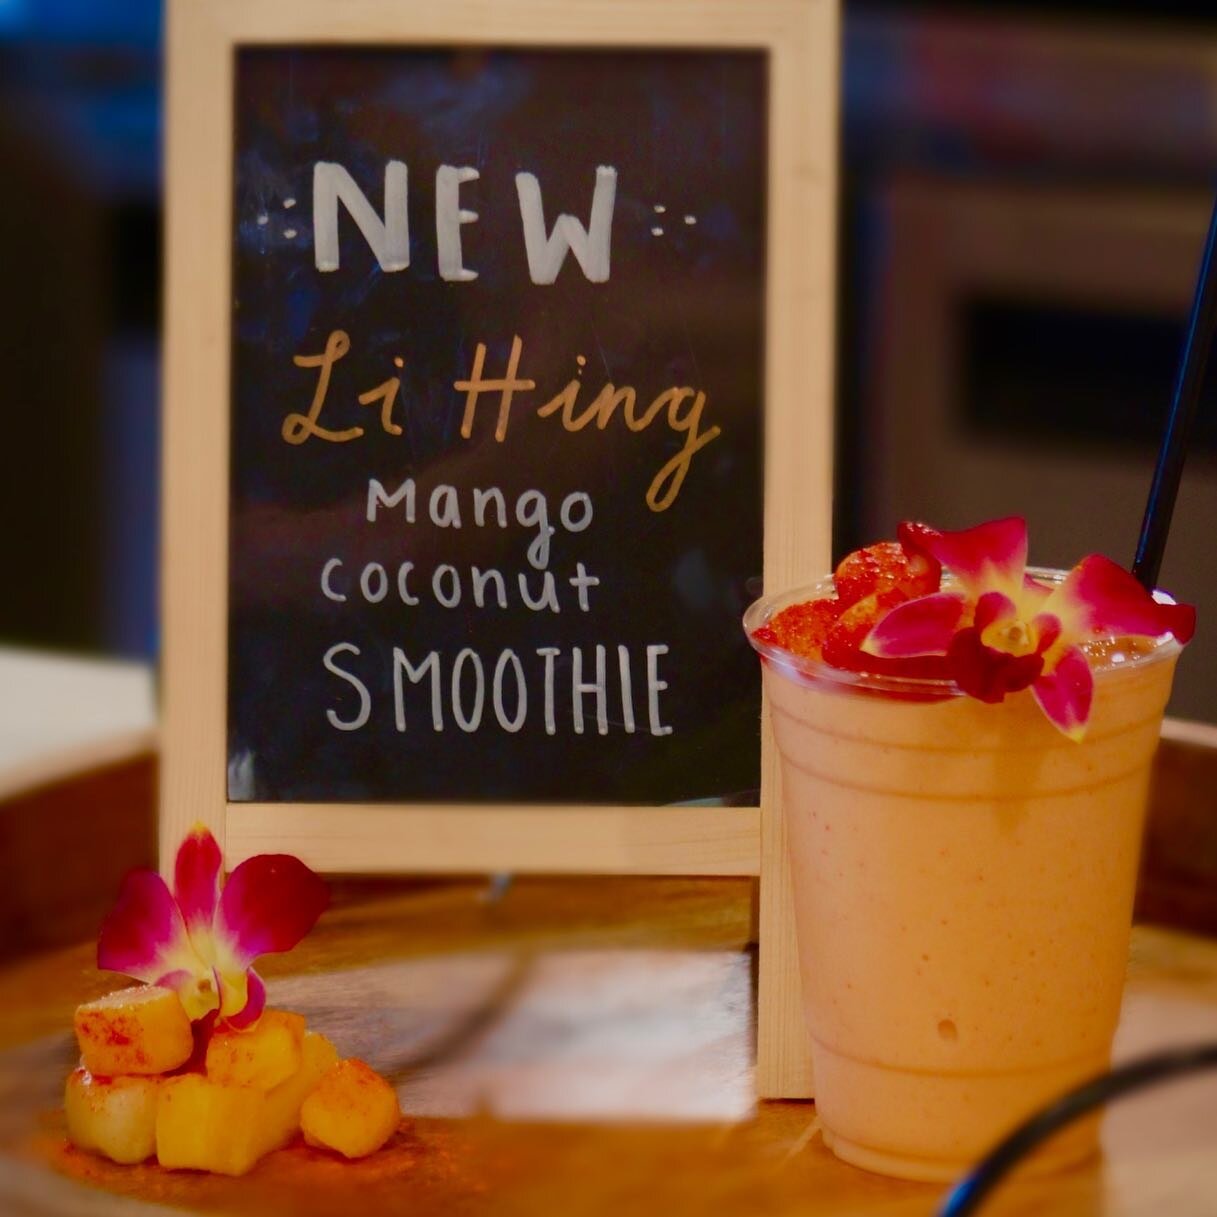 NEW!!! NEW!!! NEW!!!
Come try our new Li Hing Mango Coconut Smoothie!🥥🥭

Come visit us at:
5109 Cass Street 
San Diego, California 92109

Contact Us:
(858) 361-1280

Hours of operation:
M-F: 7am-2pm
Sat/Sun: 7am-3pm
𓆉❀☼
 #pacificbeach #leilaniscaf